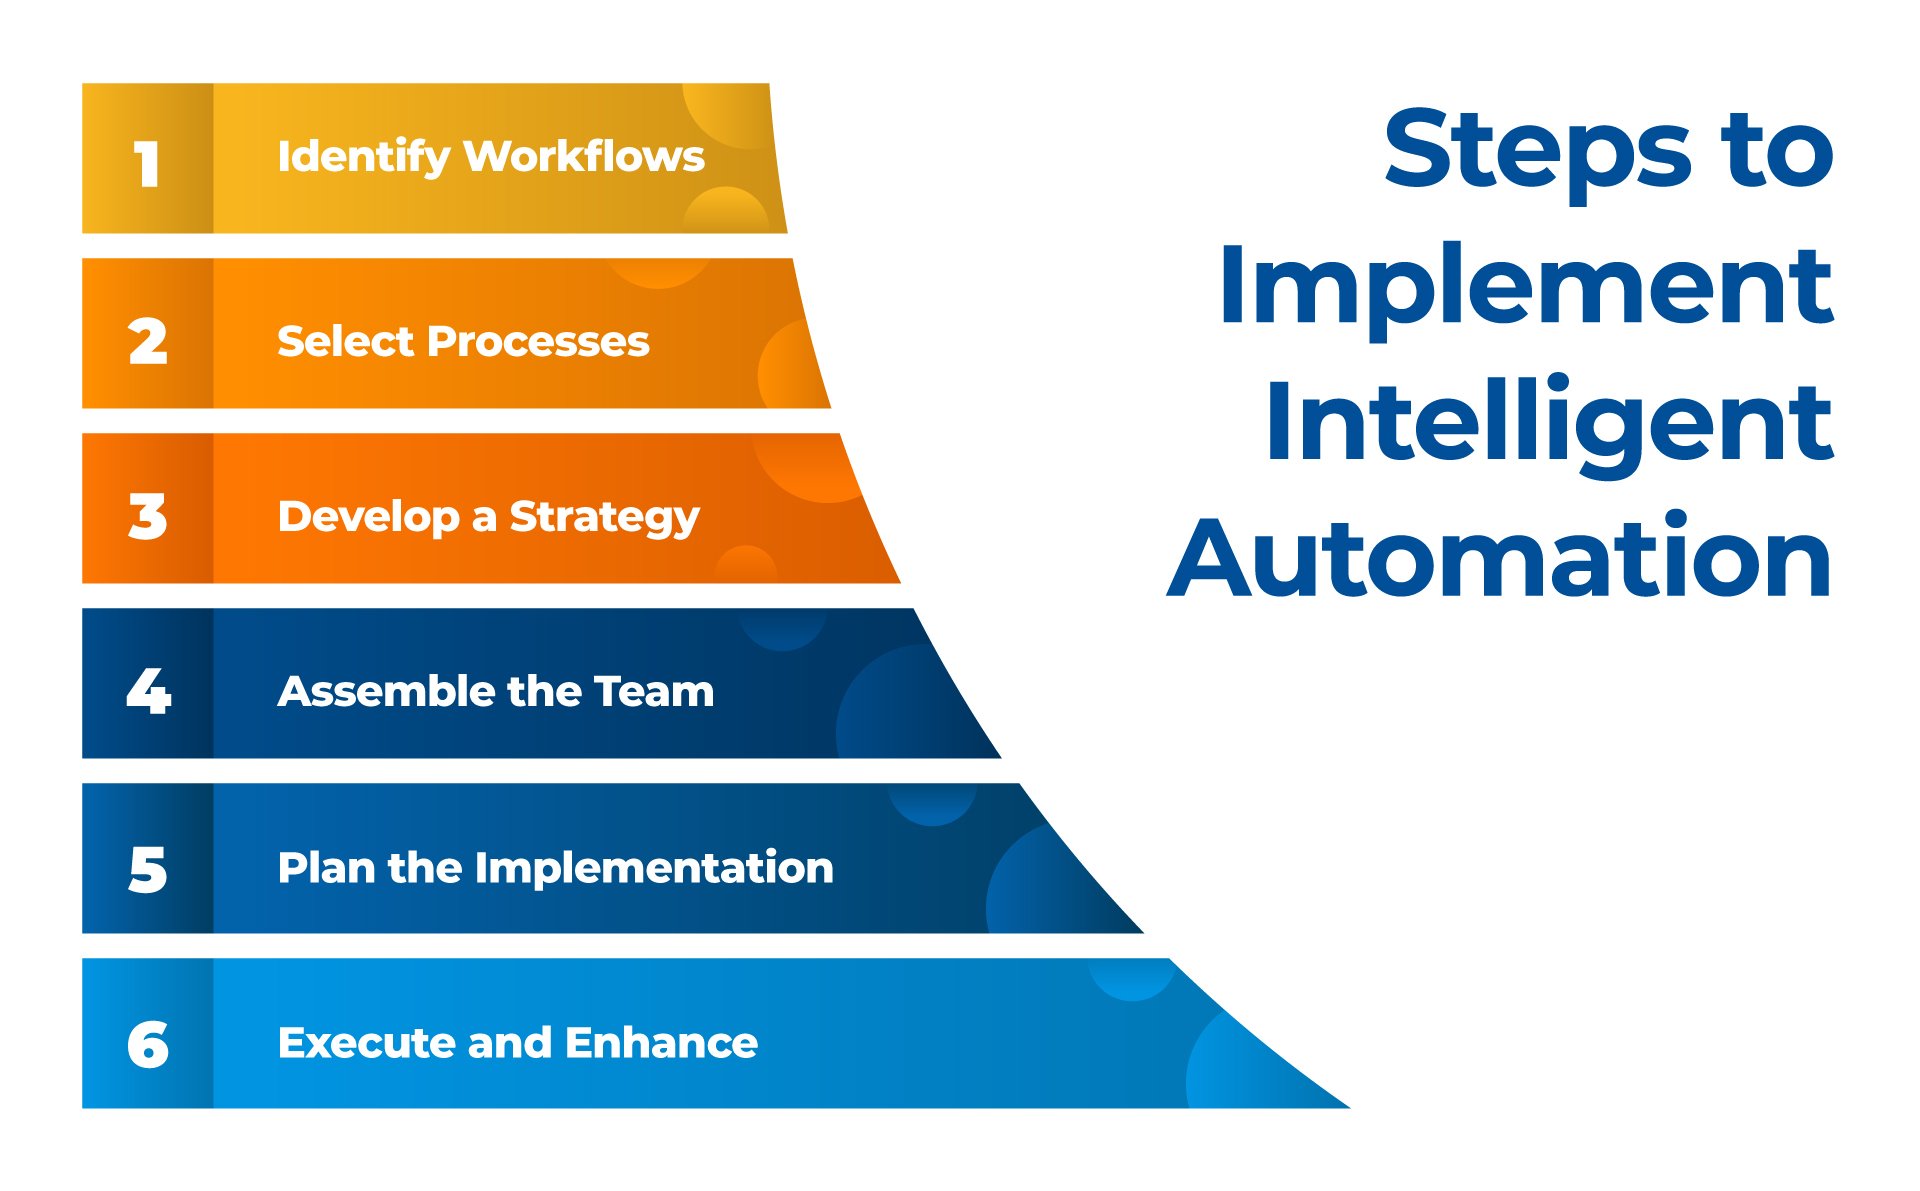 Steps to Implement Intelligent Automation in Your Organization_Kanerika